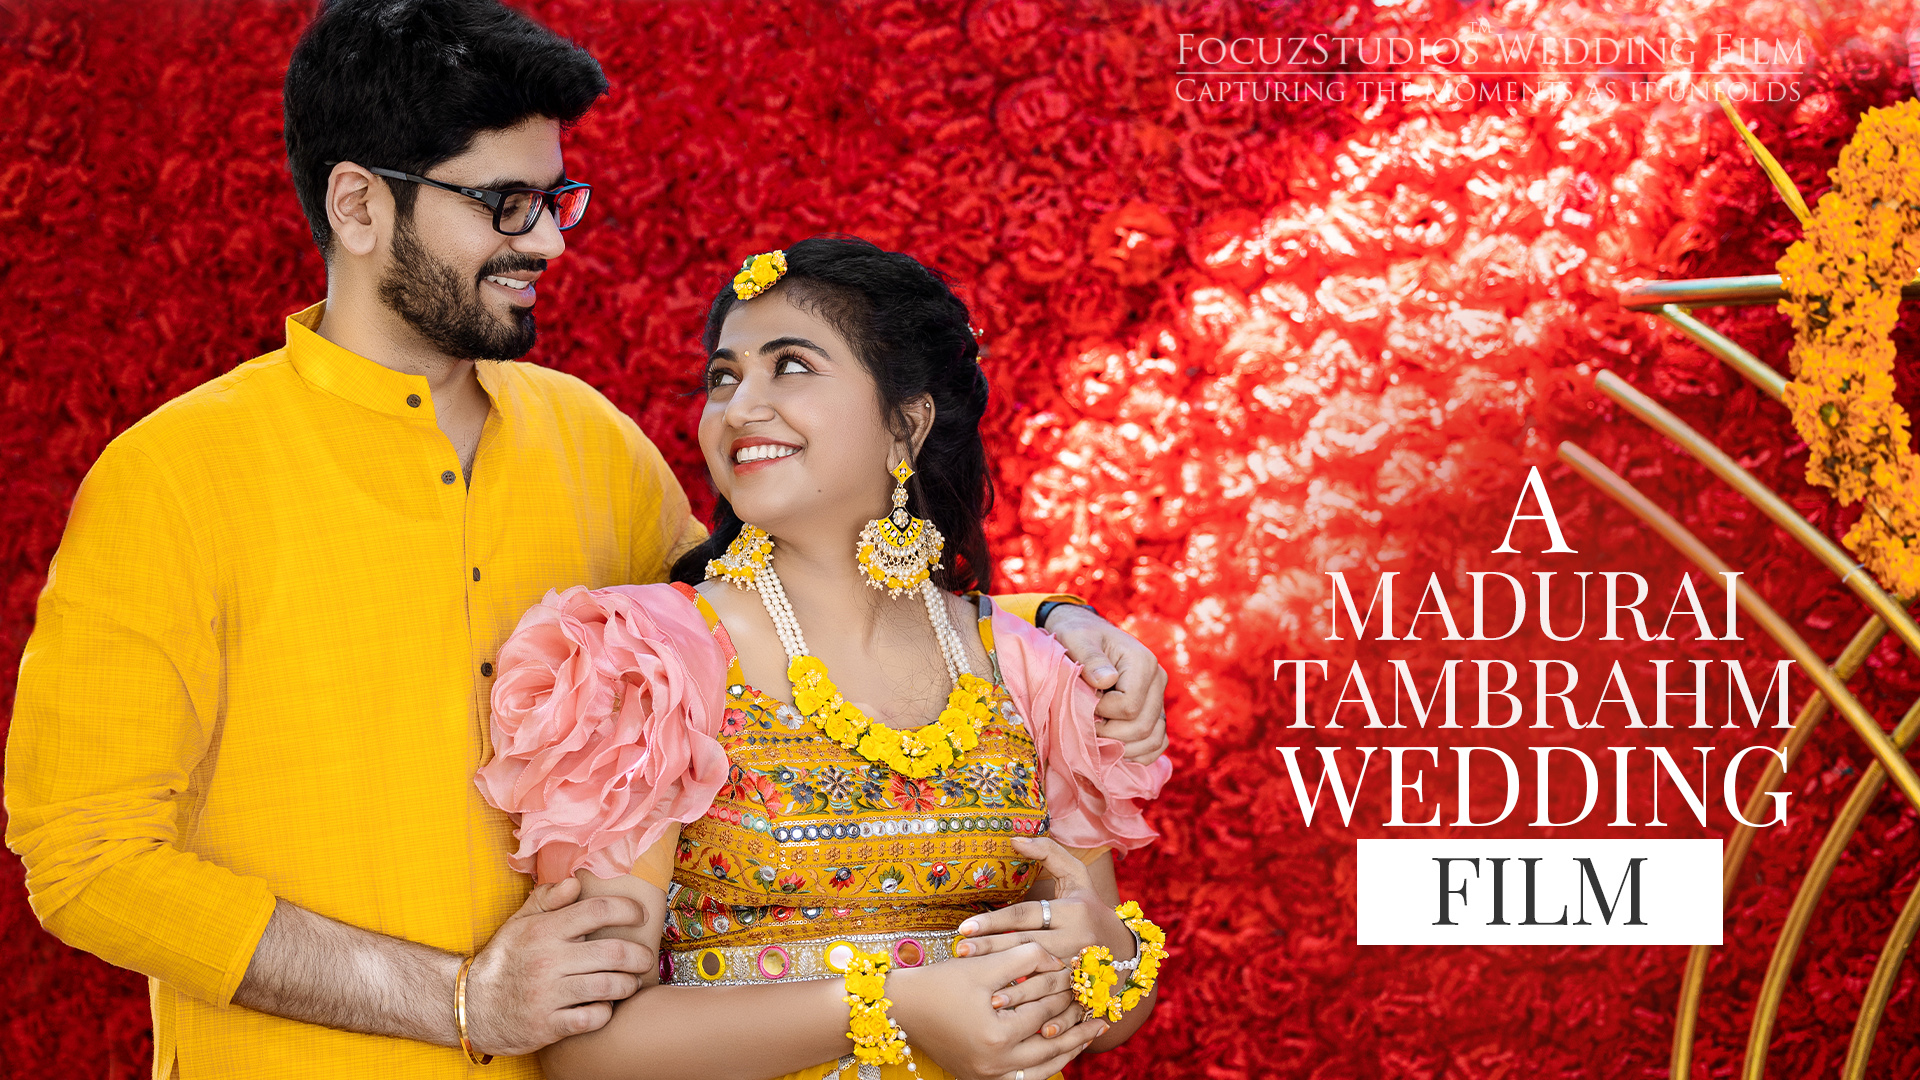 Madurai Tambrahm Wedding: A Celebration of Tradition and Love